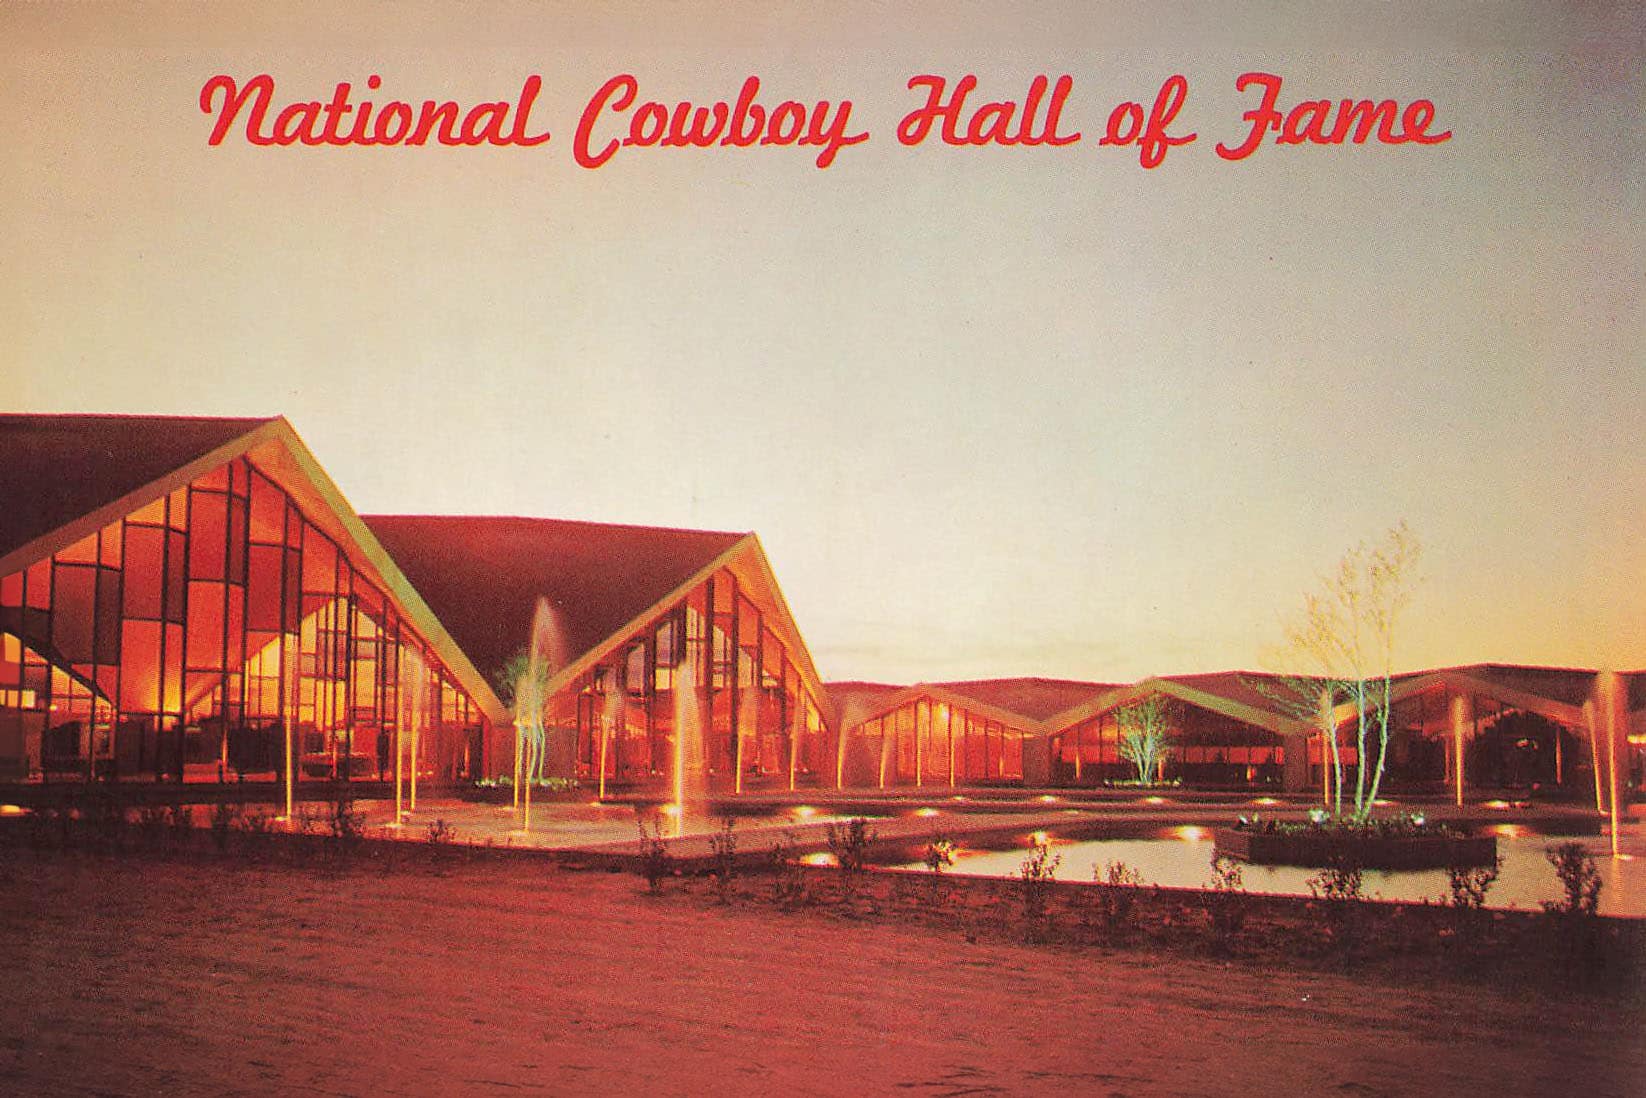 An early postcard from the National Cowboy Hall of Fame.